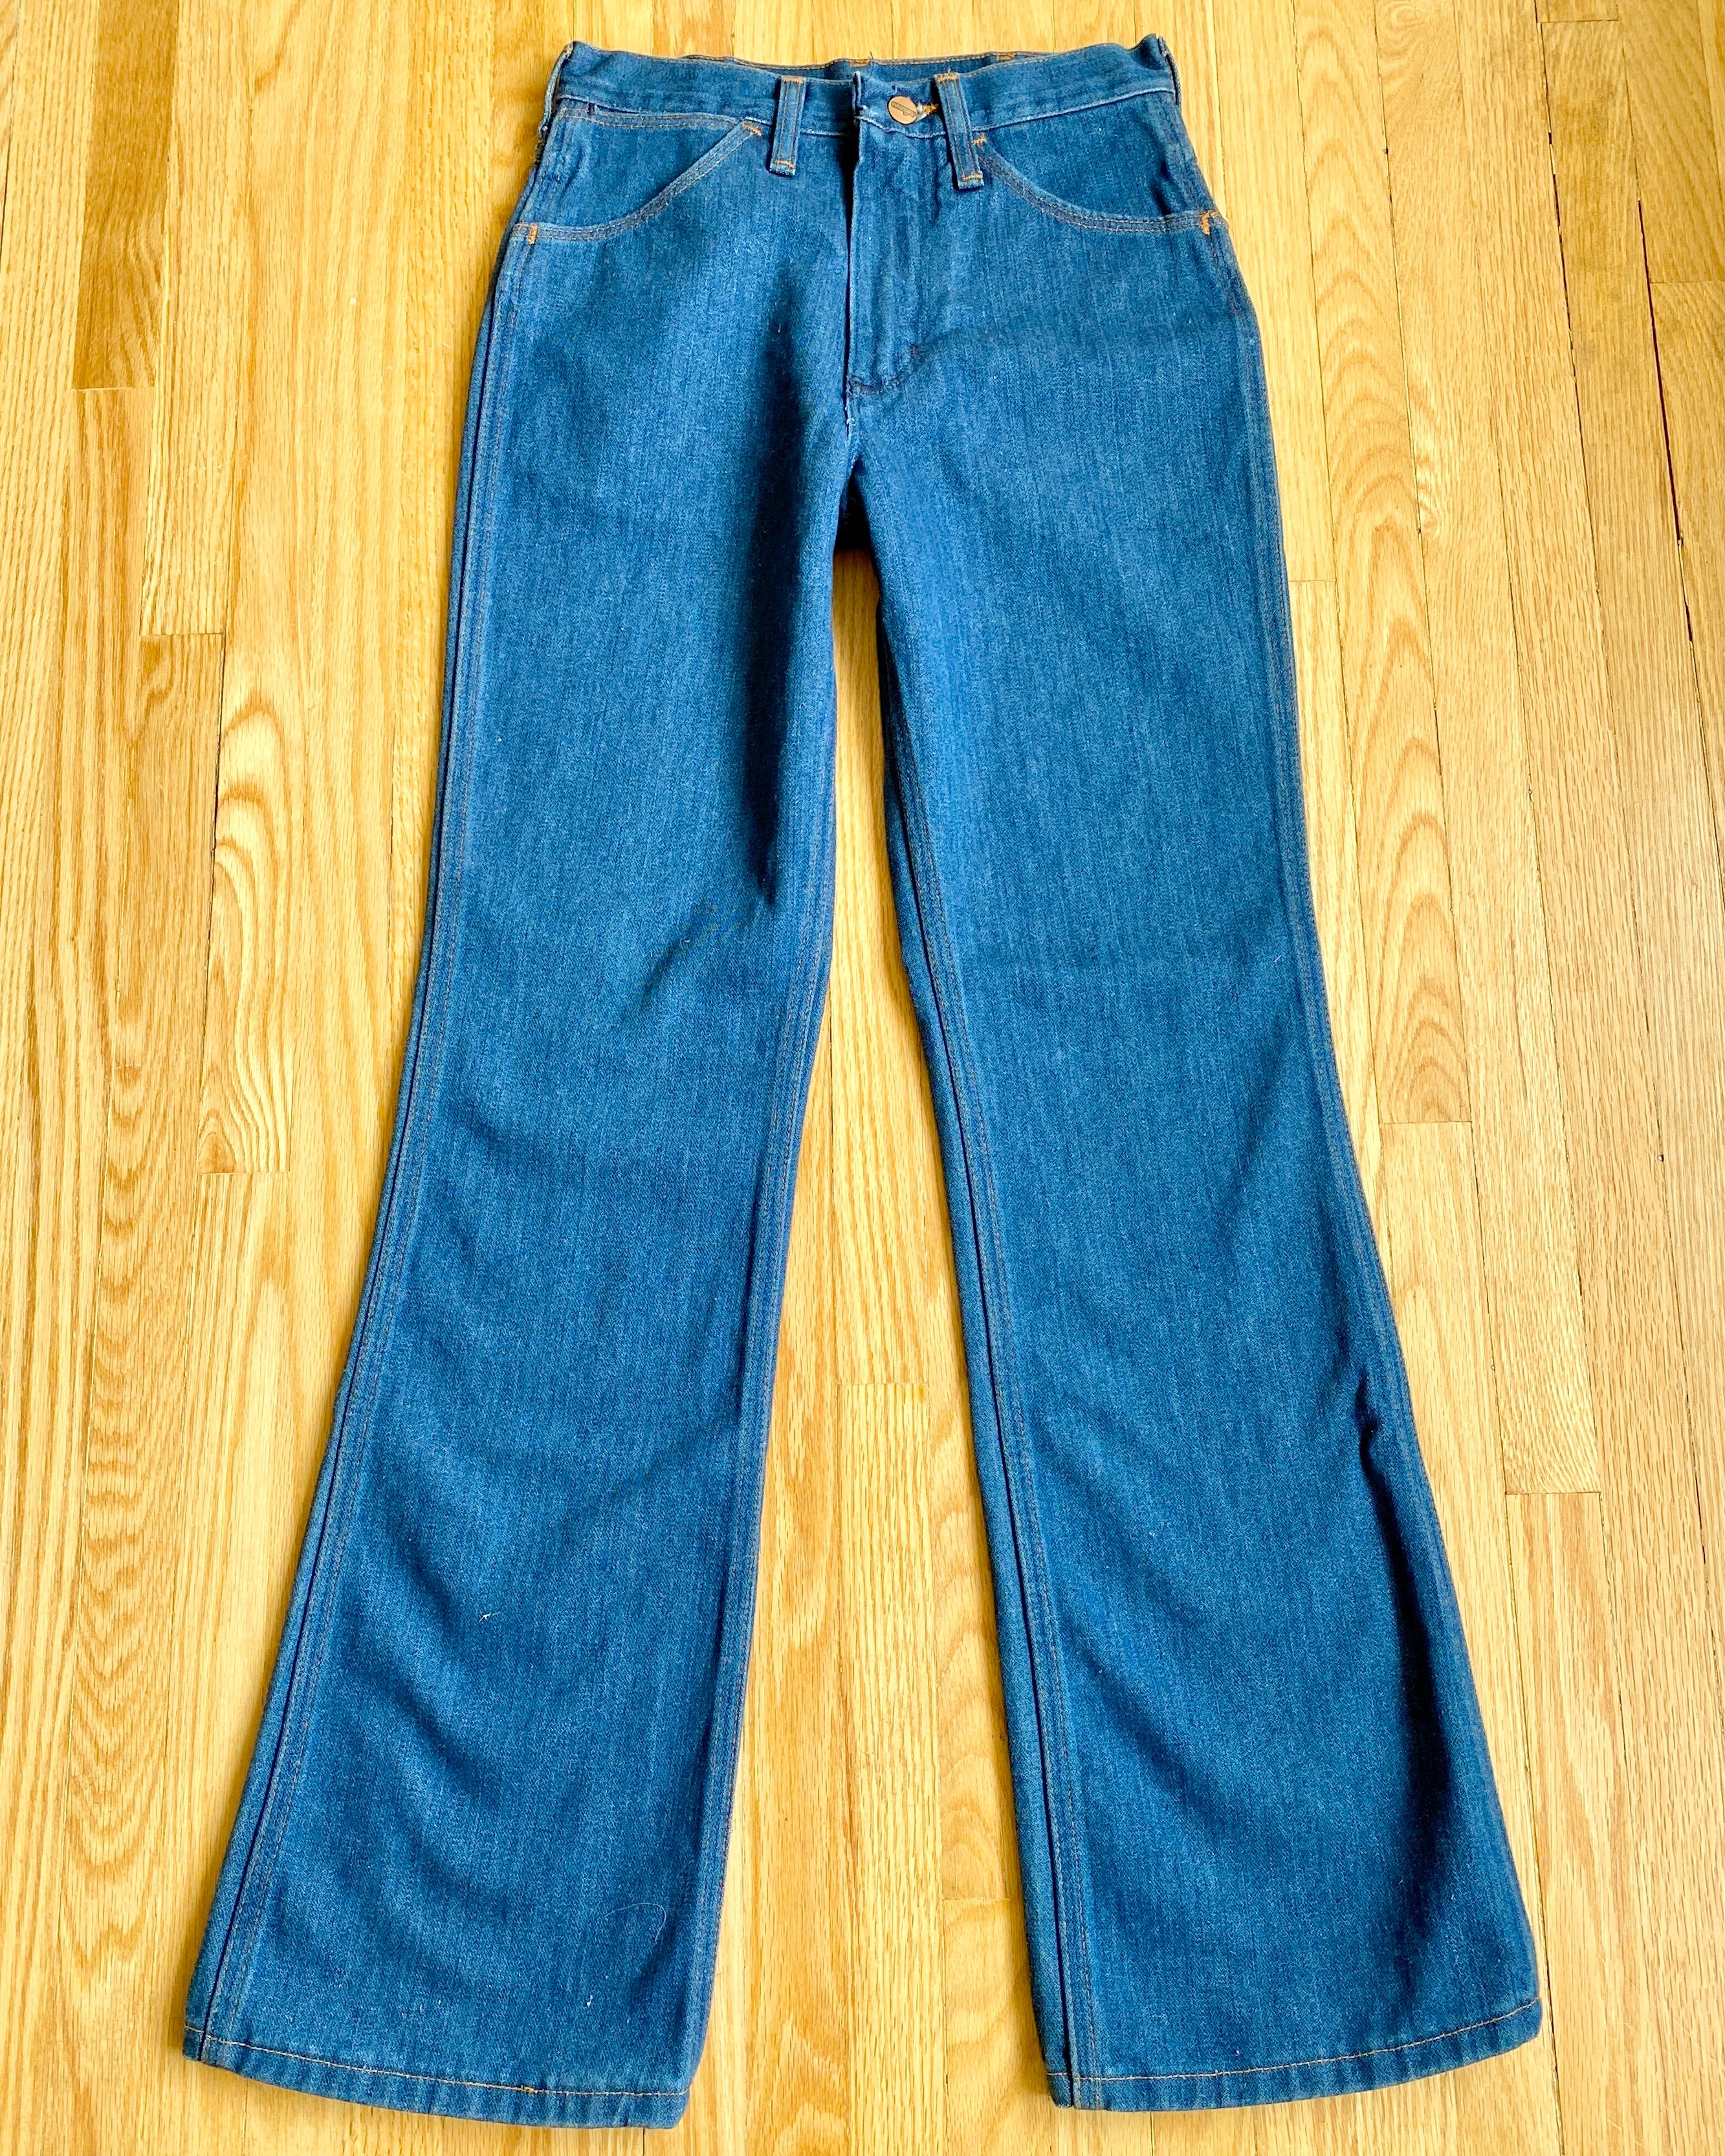 Vintage Wranglers Dark Wash Jeans Made in USA size 26 to 27